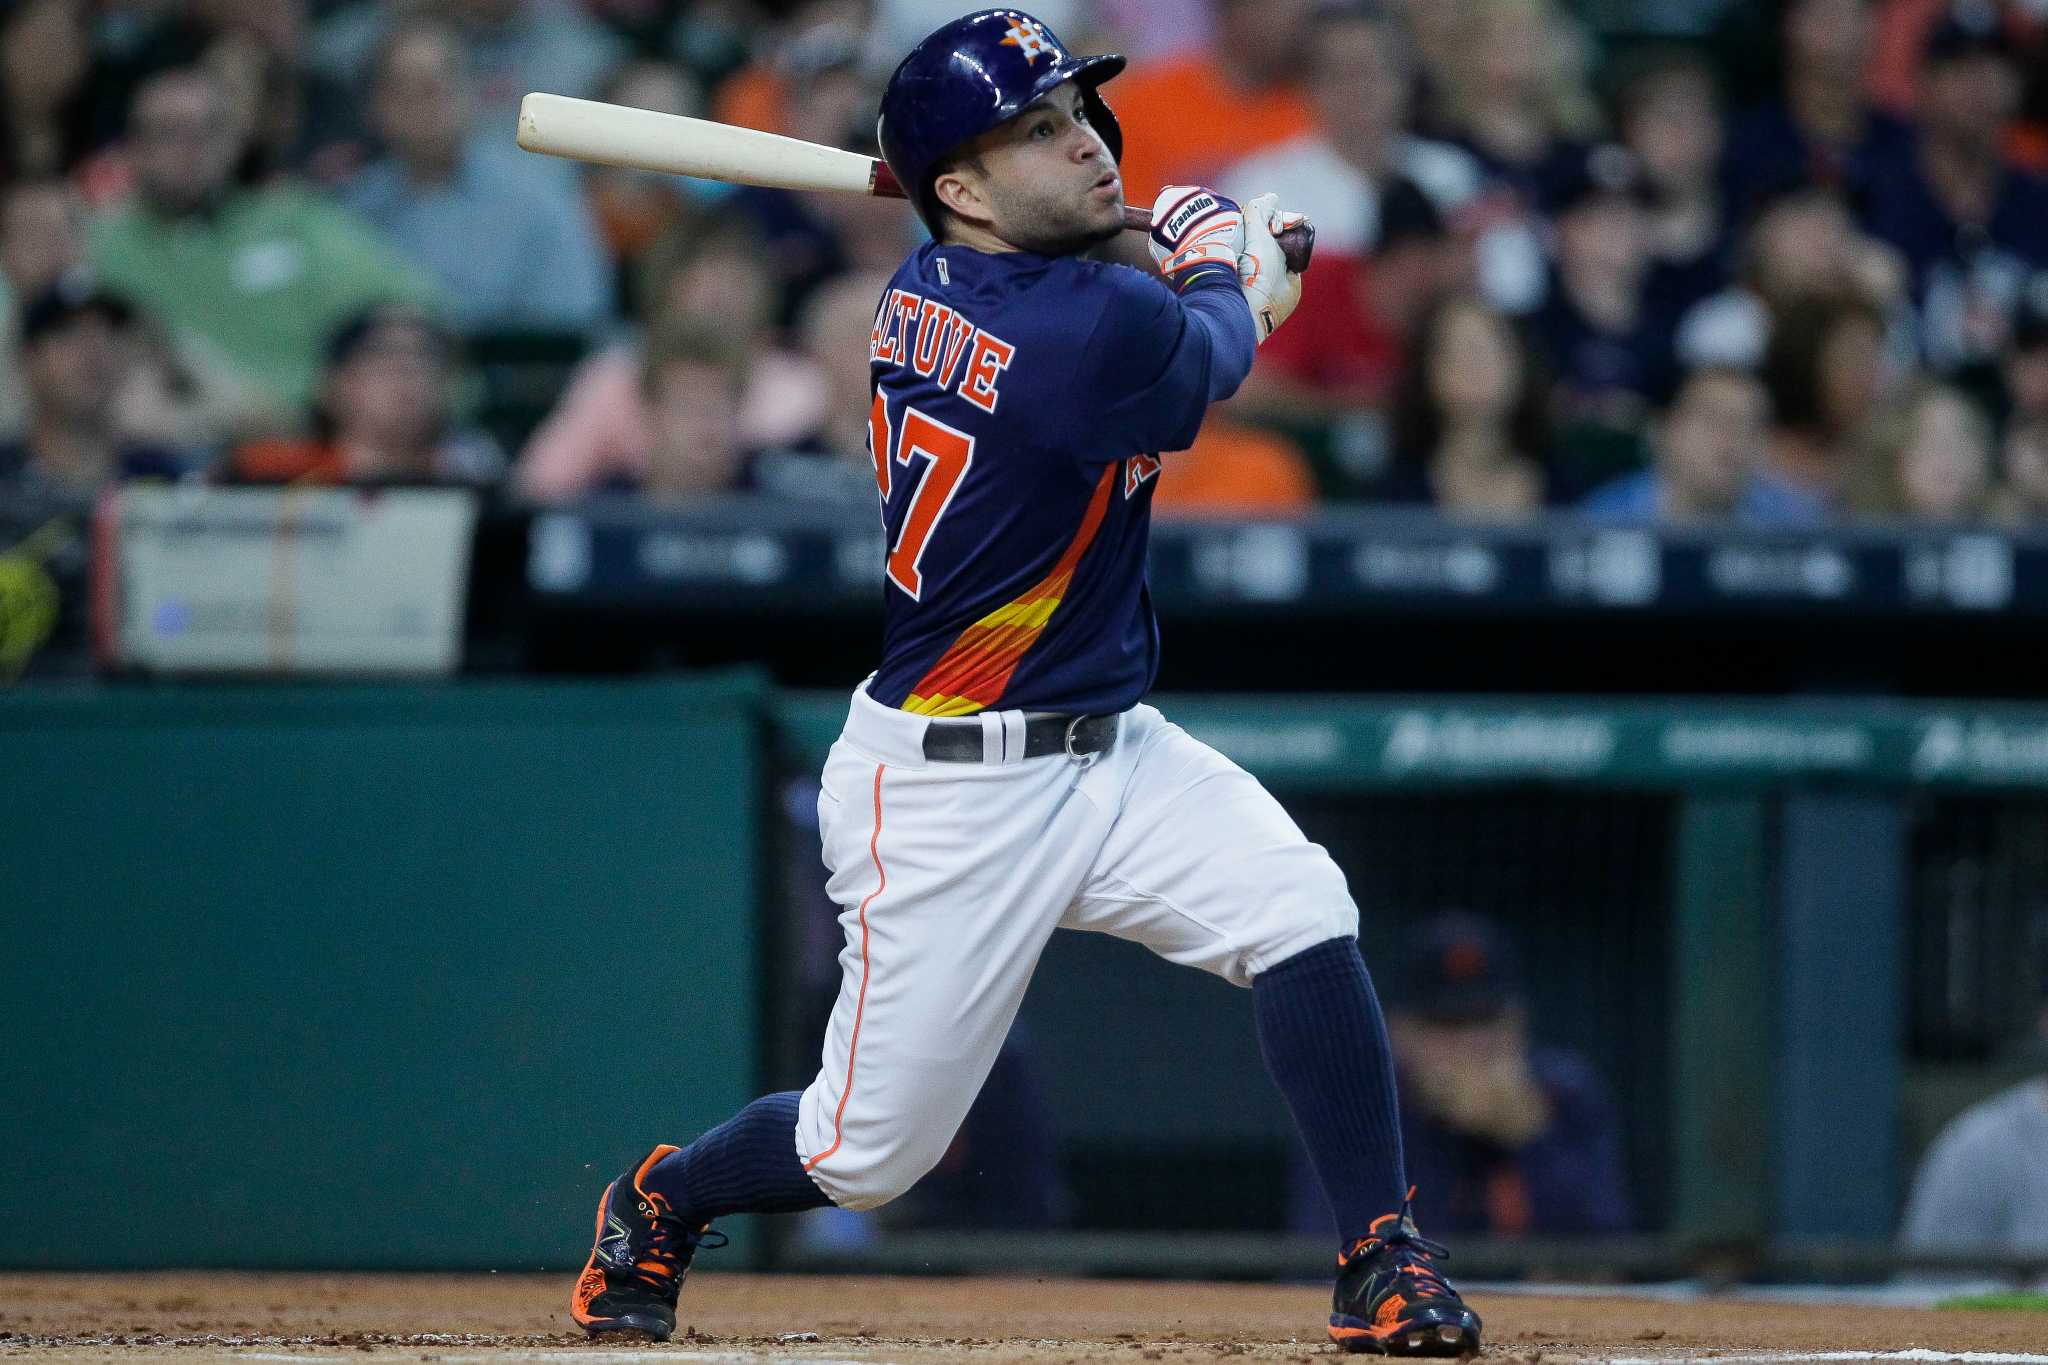 Altuve's back, the Astros are surging — all's right with the